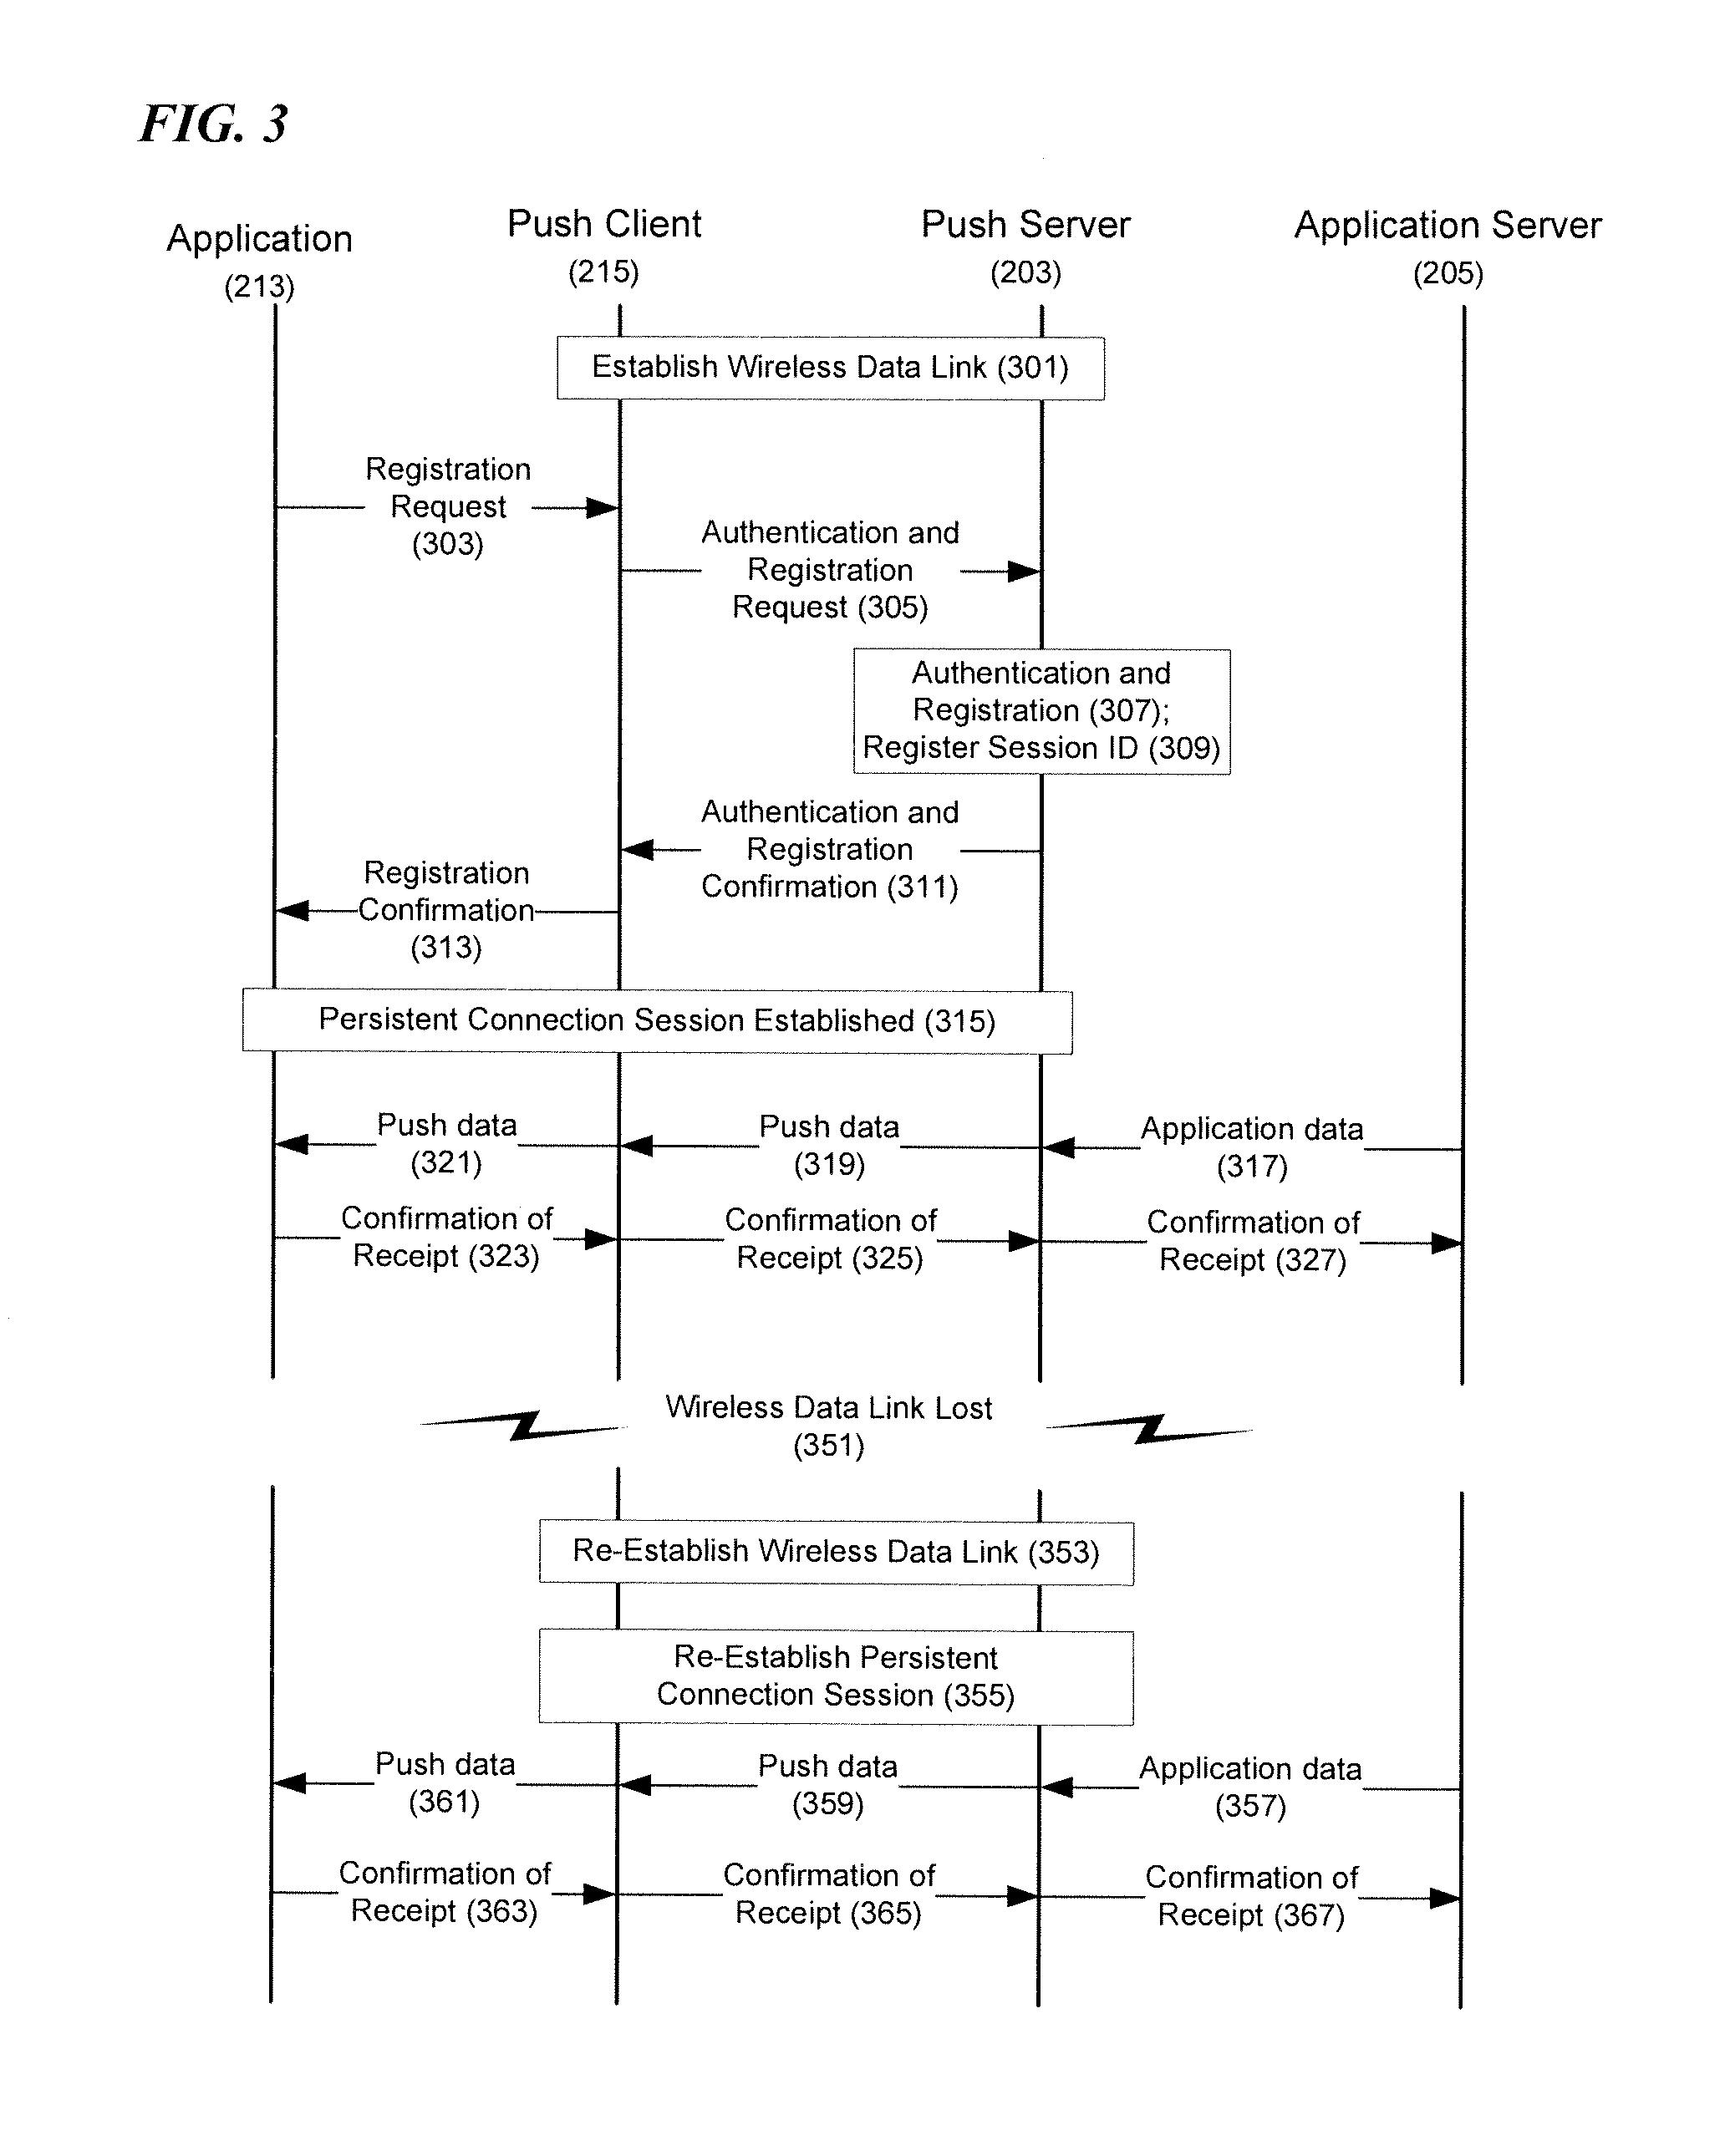 Method of device authentication and application registration in a push communication framework